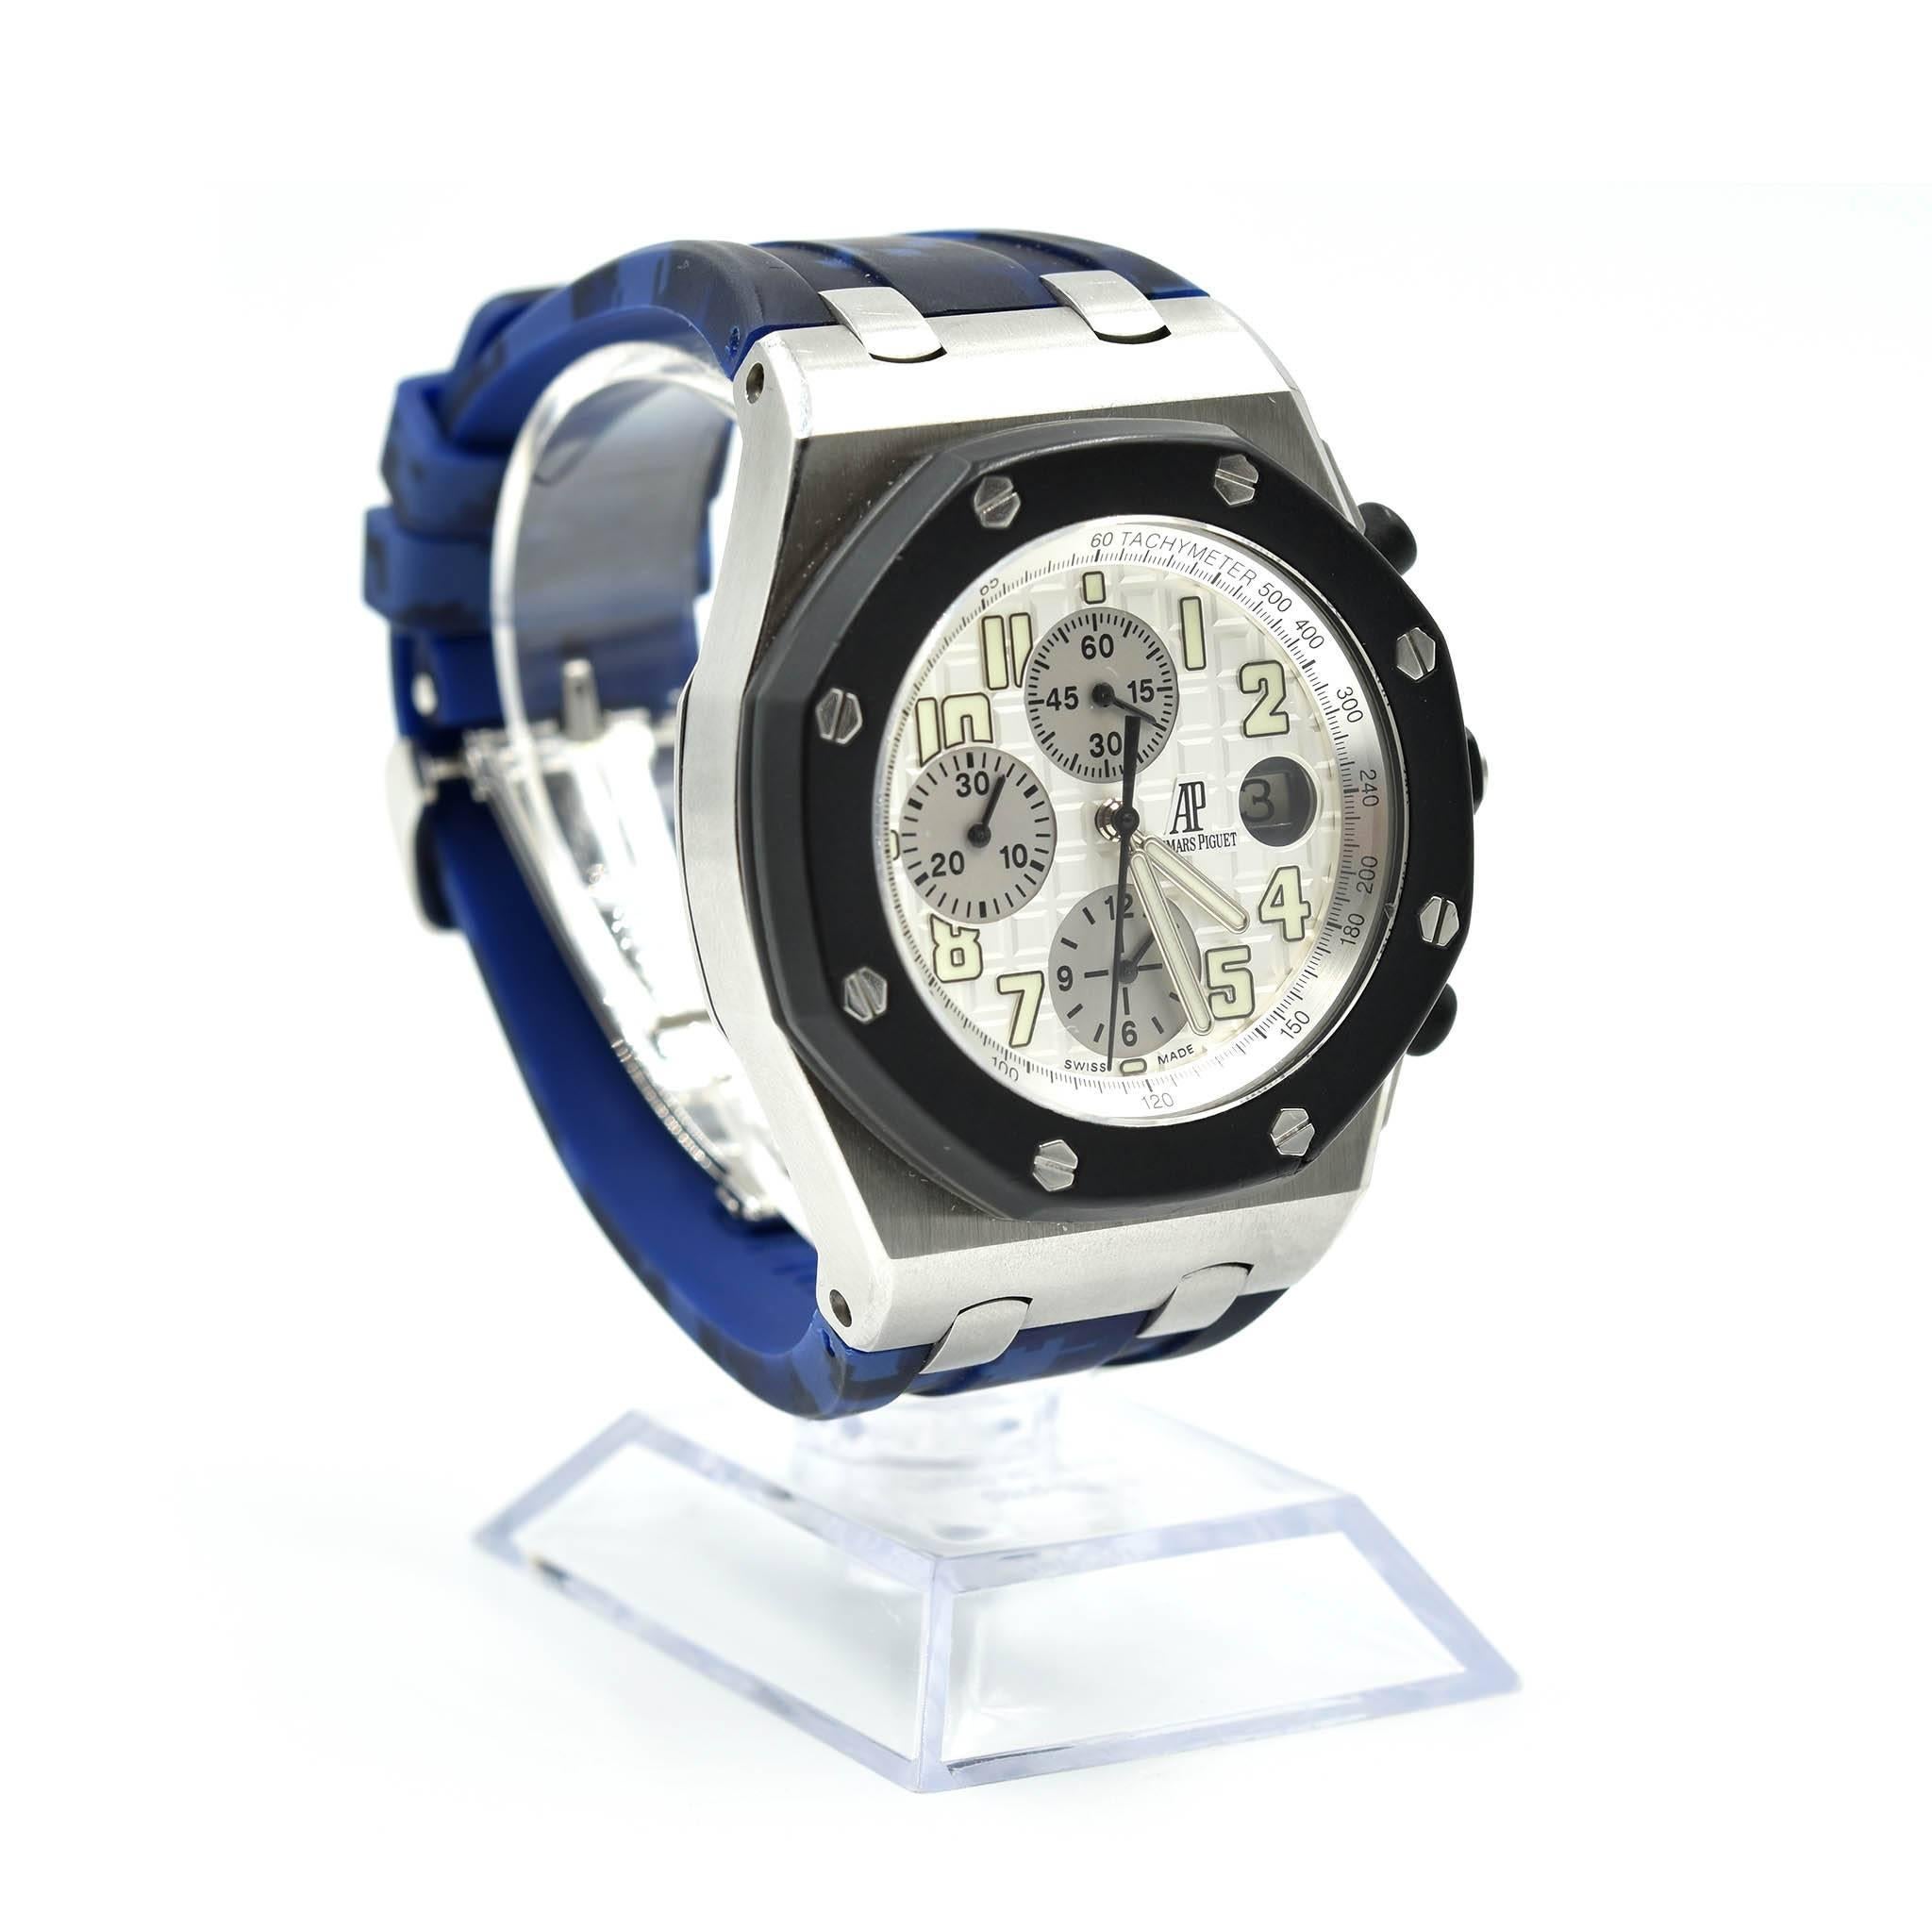 Movement: automatic self-winding movement
Function: hours, minutes, small-seconds, date, chronograph and tachymeter
Case: stainless steel octagon 42mm case with solid case back, sapphire crystal protector
Band: black and blue rubber band with